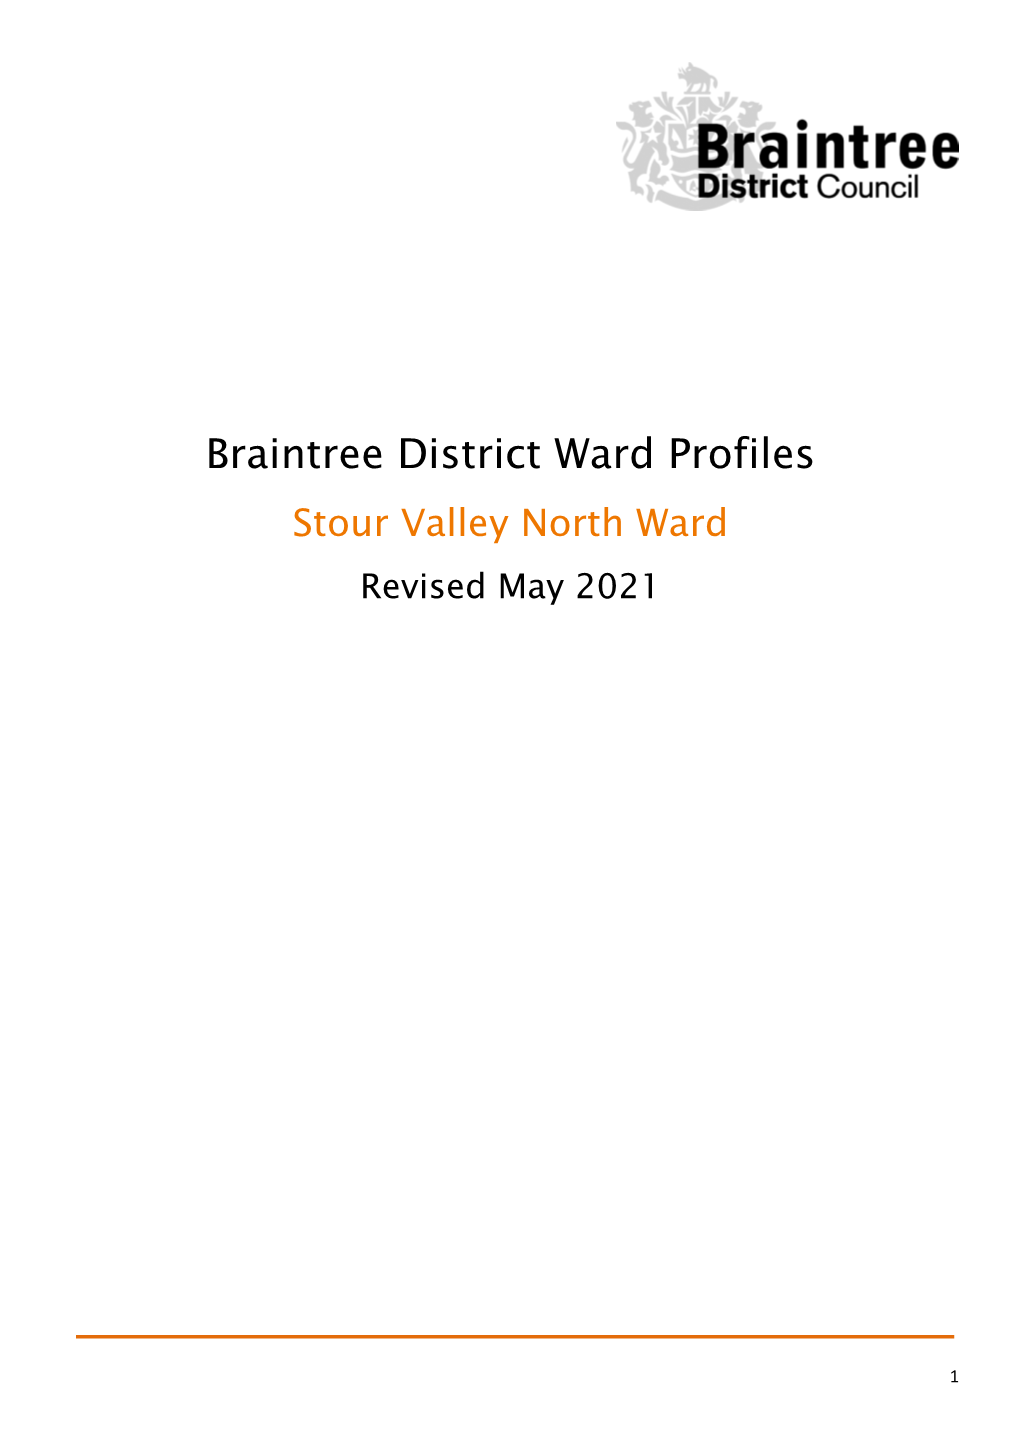 Braintree District Ward Profiles Stour Valley North Ward Revised May 2021